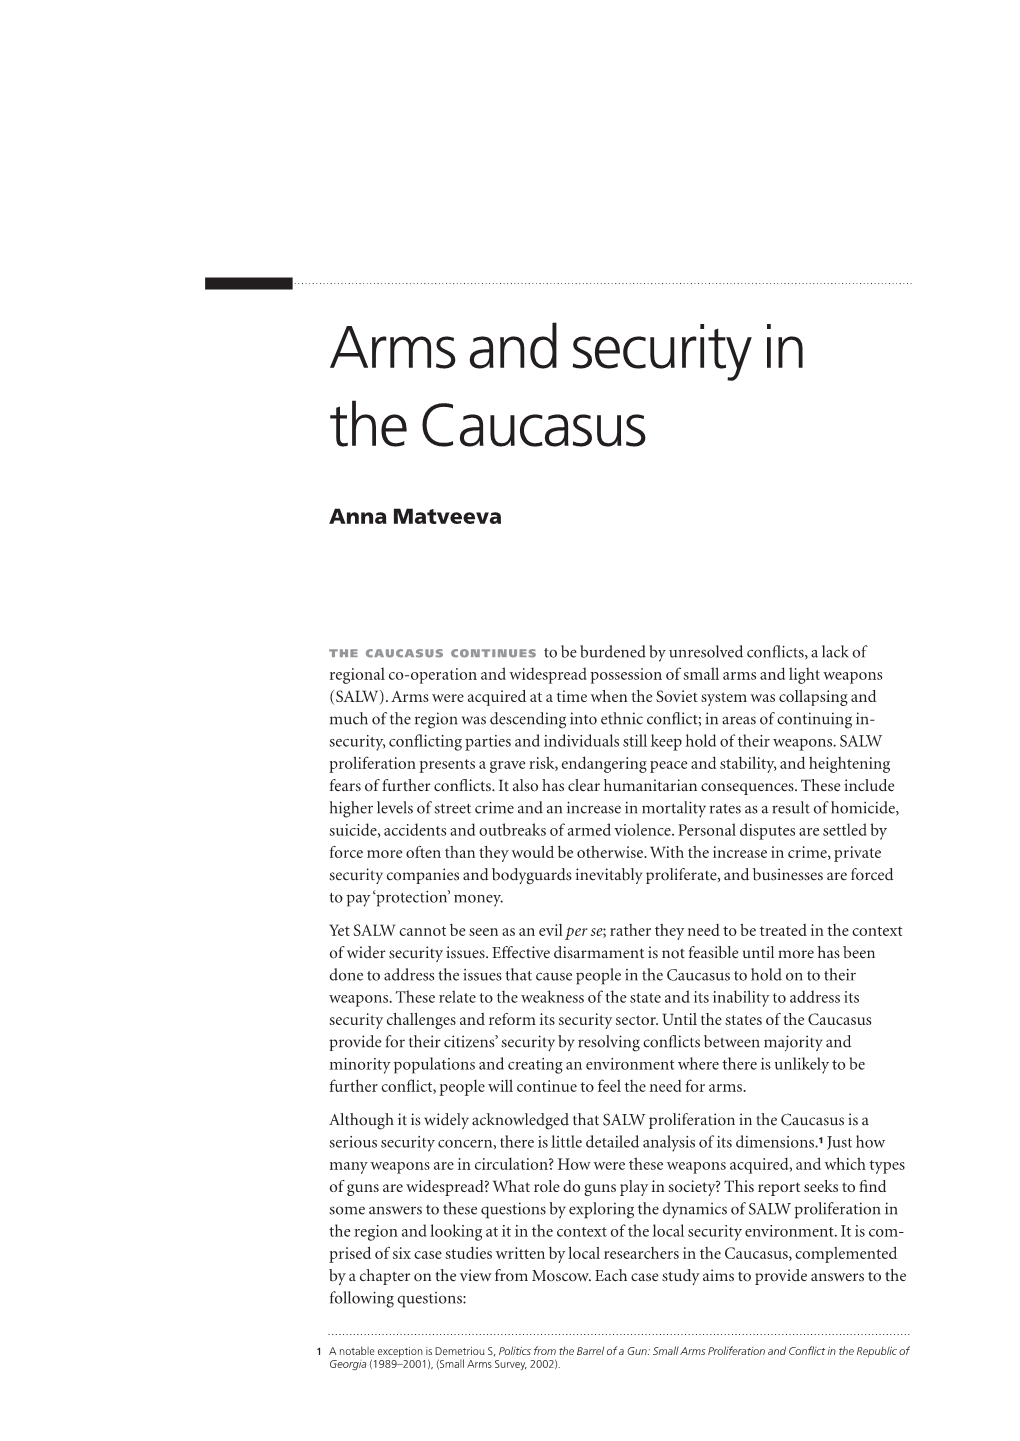 Arms and Security in the Caucasus